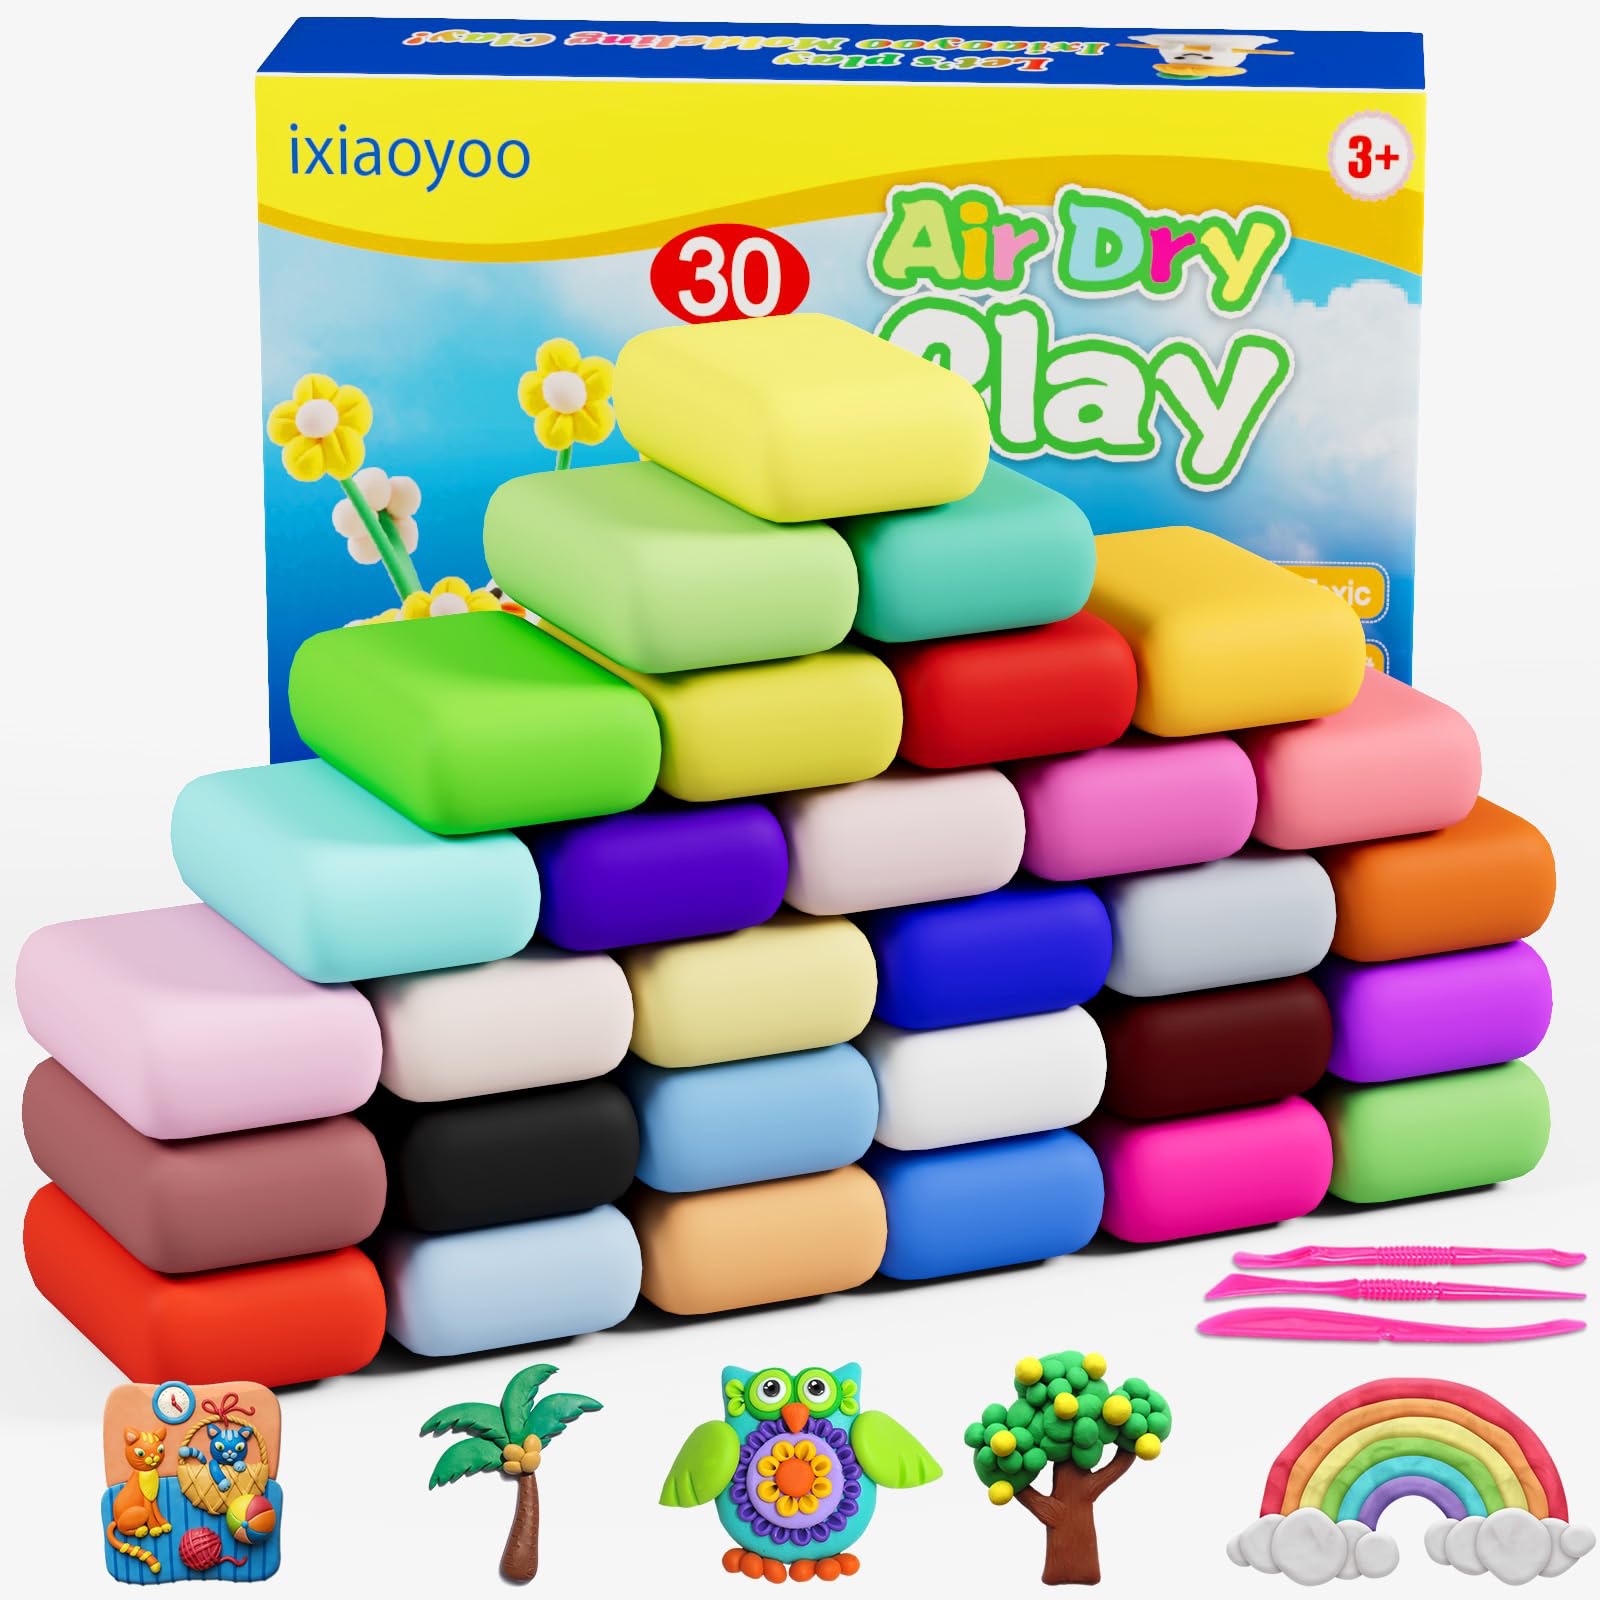 Amazon.com: Ixiaoyoo Air Dry Clay, Modelling Clay for Kids, 30 Colors DIY Molding Magic Clay for with Tools, Soft & Non-Sticky, Toys Gifts for Age 3 4 5 6 7 8+ Years Old Boys Girls Kids : Arts, Crafts